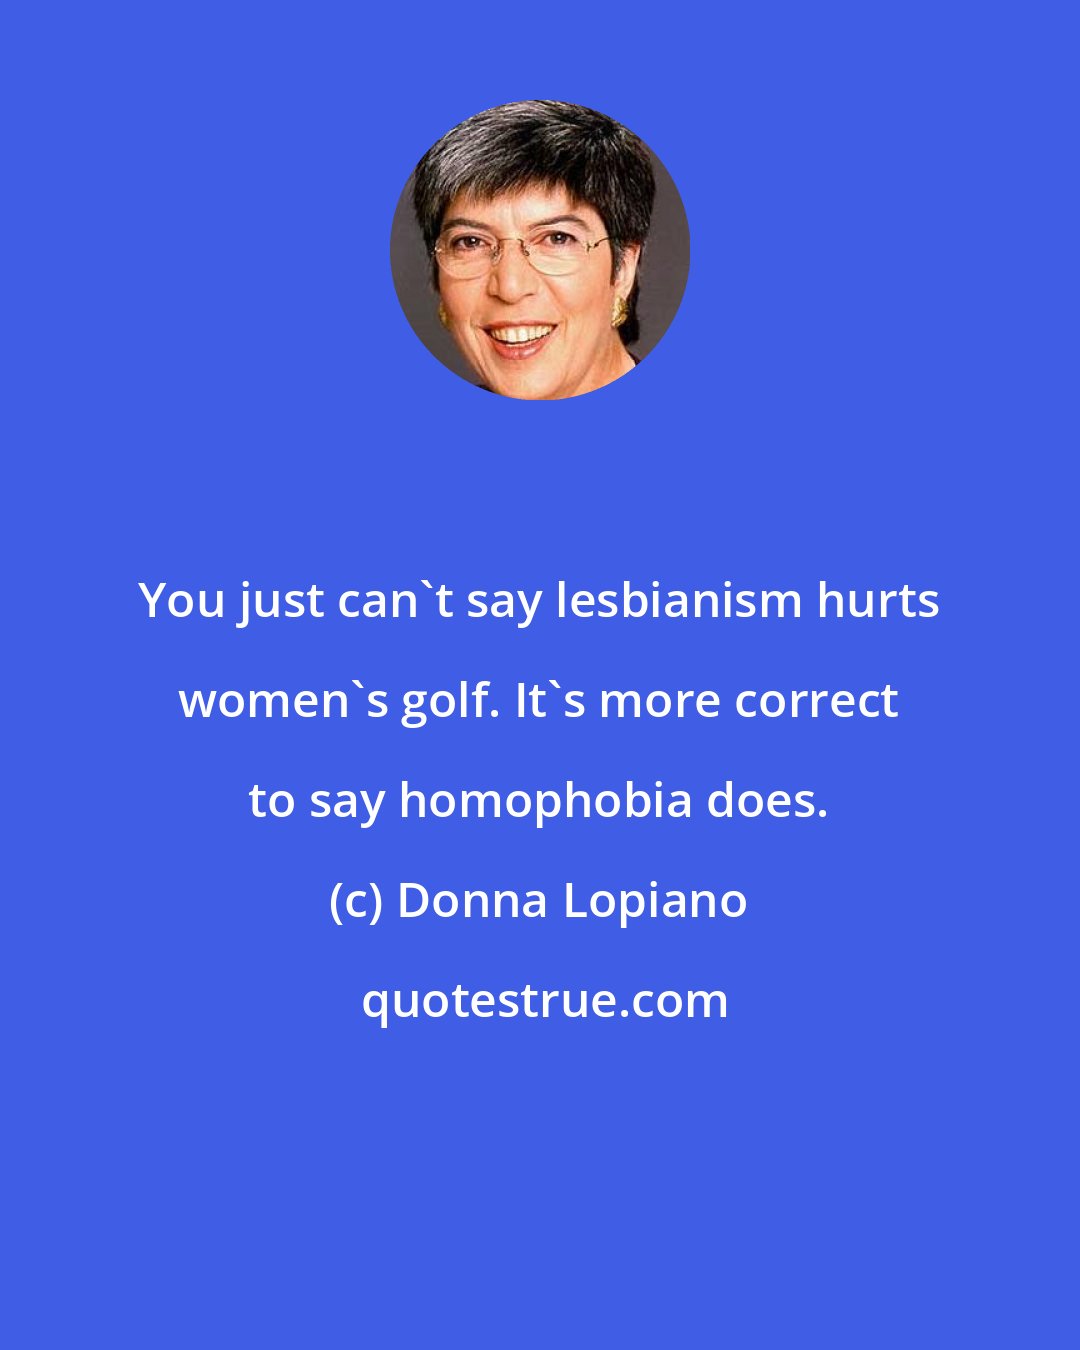 Donna Lopiano: You just can't say lesbianism hurts women's golf. It's more correct to say homophobia does.